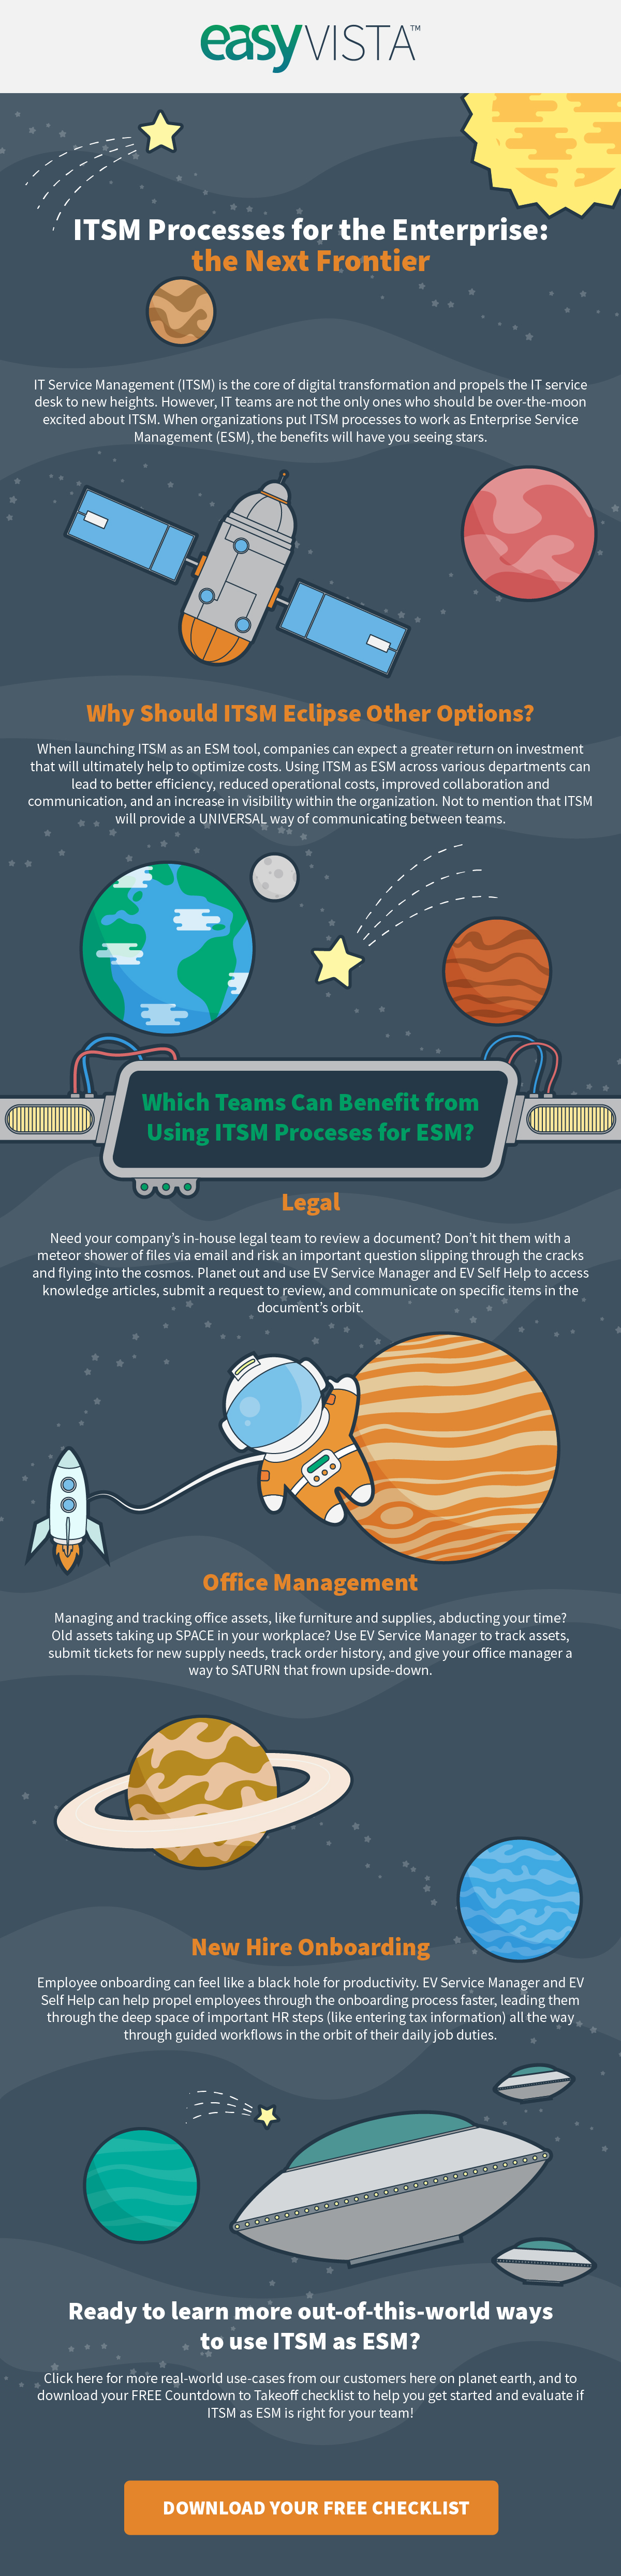 Infographic-3-ways-to-take-service-management-beond-IT-EN